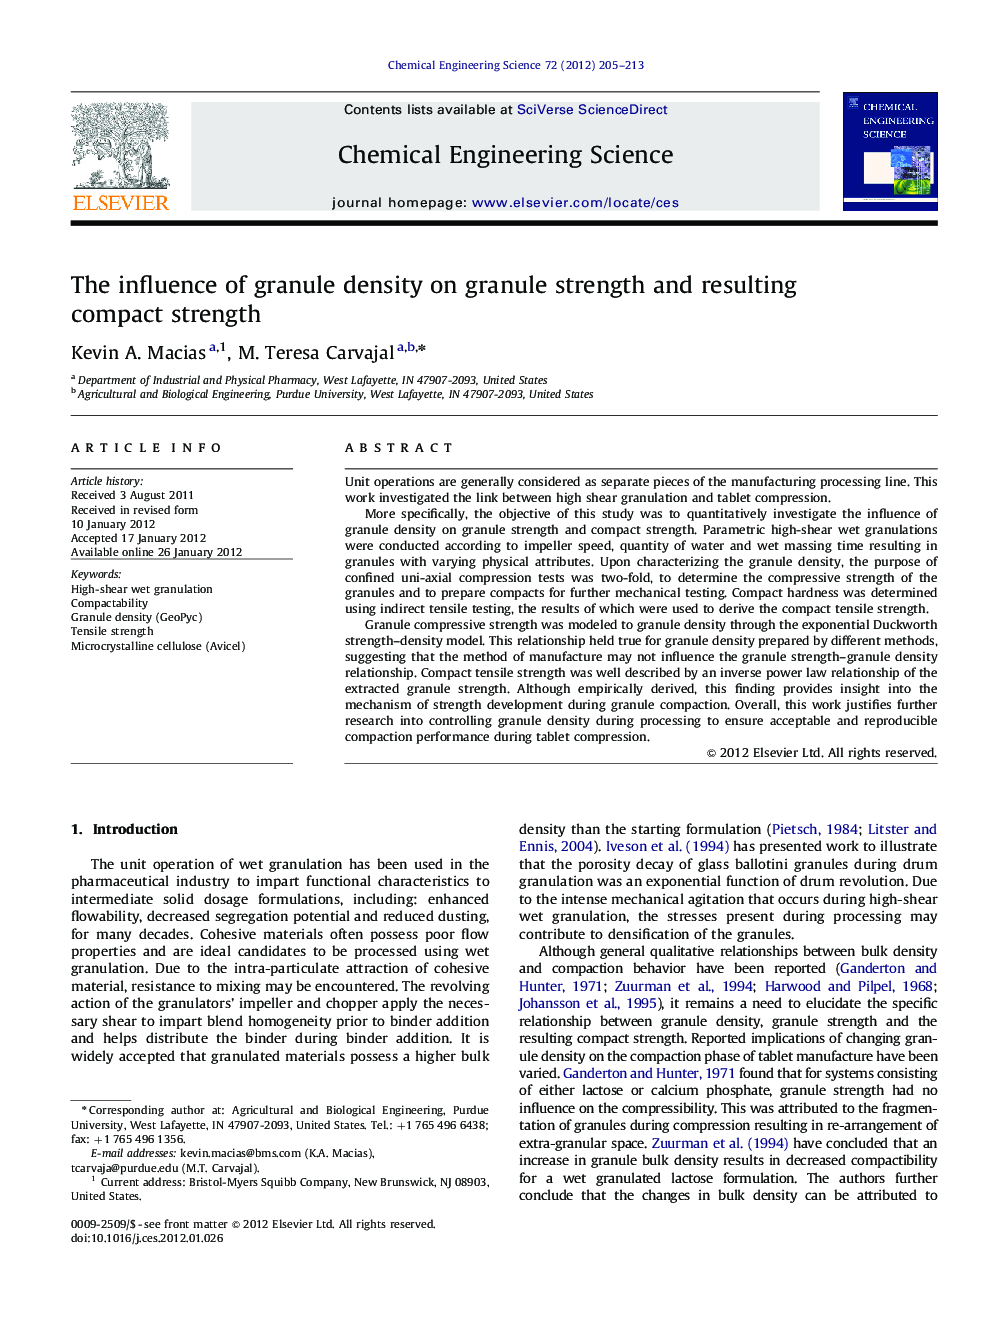 The influence of granule density on granule strength and resulting compact strength